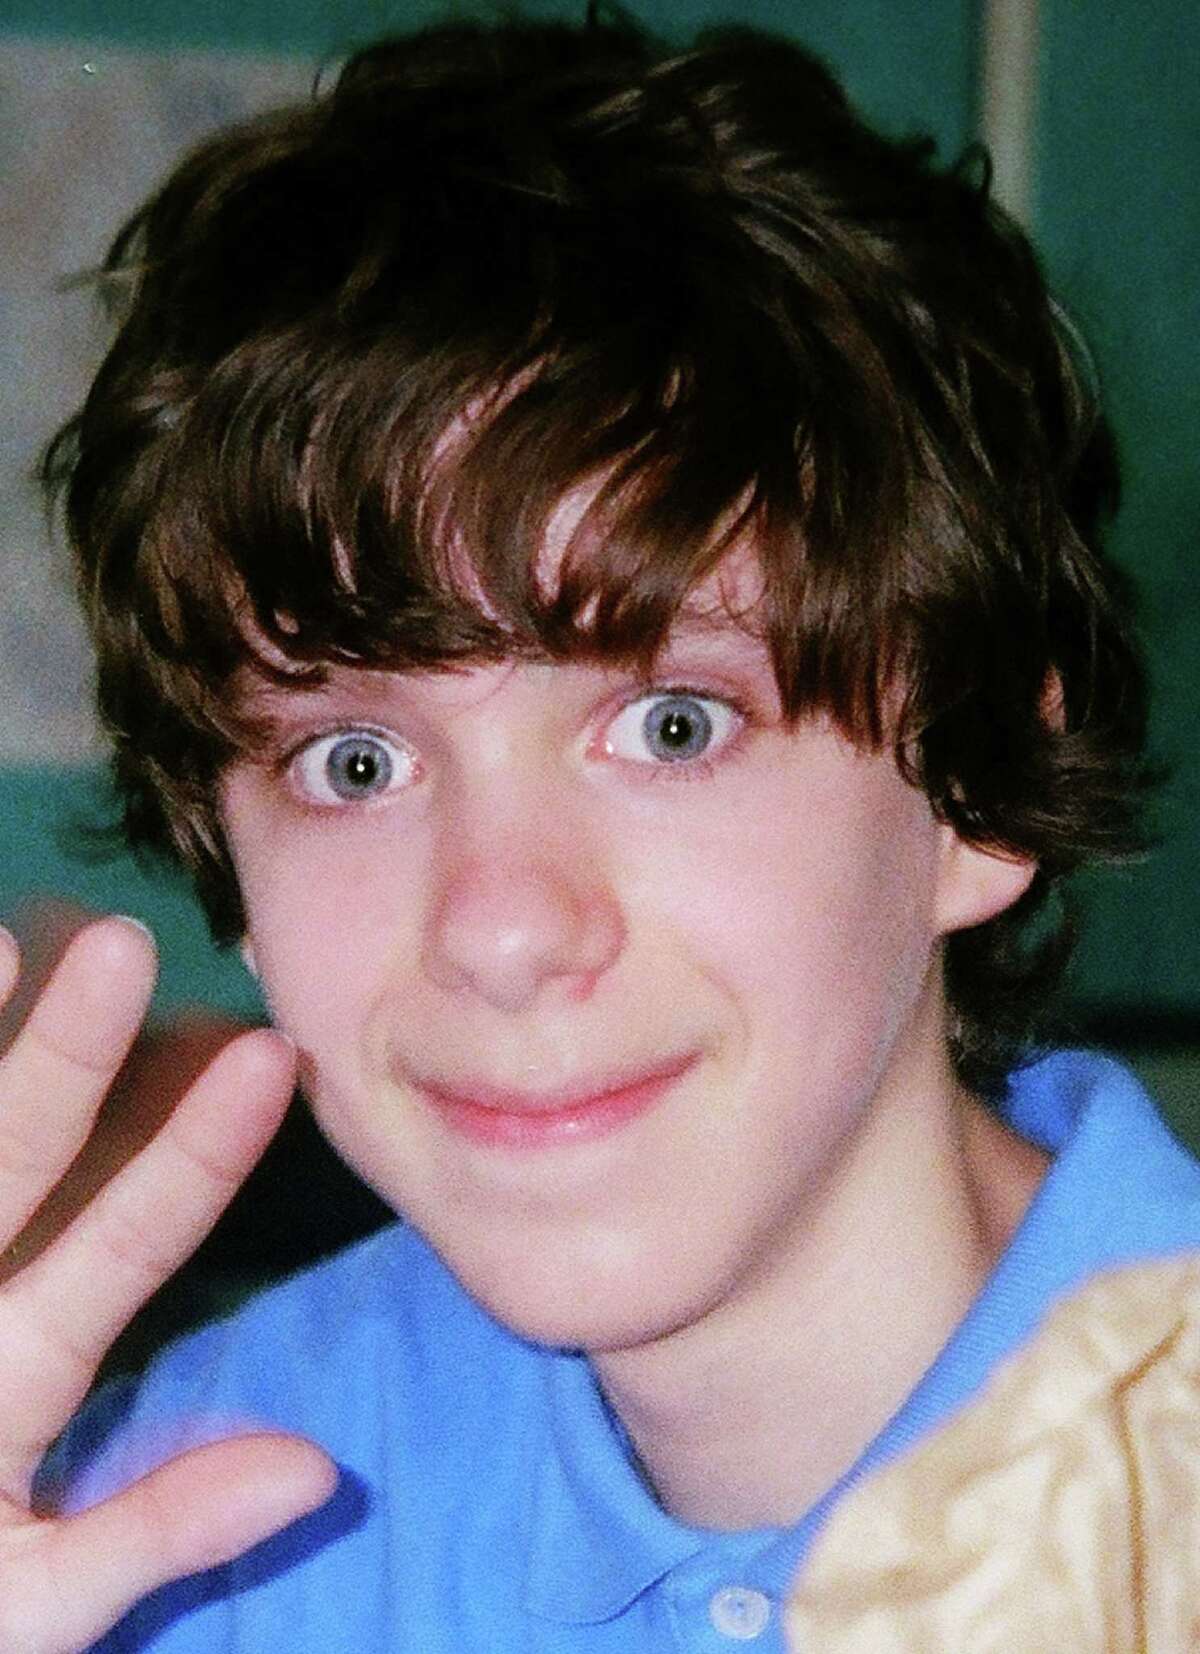 A young Adam Lanza is pictured in this undated image from 2005.